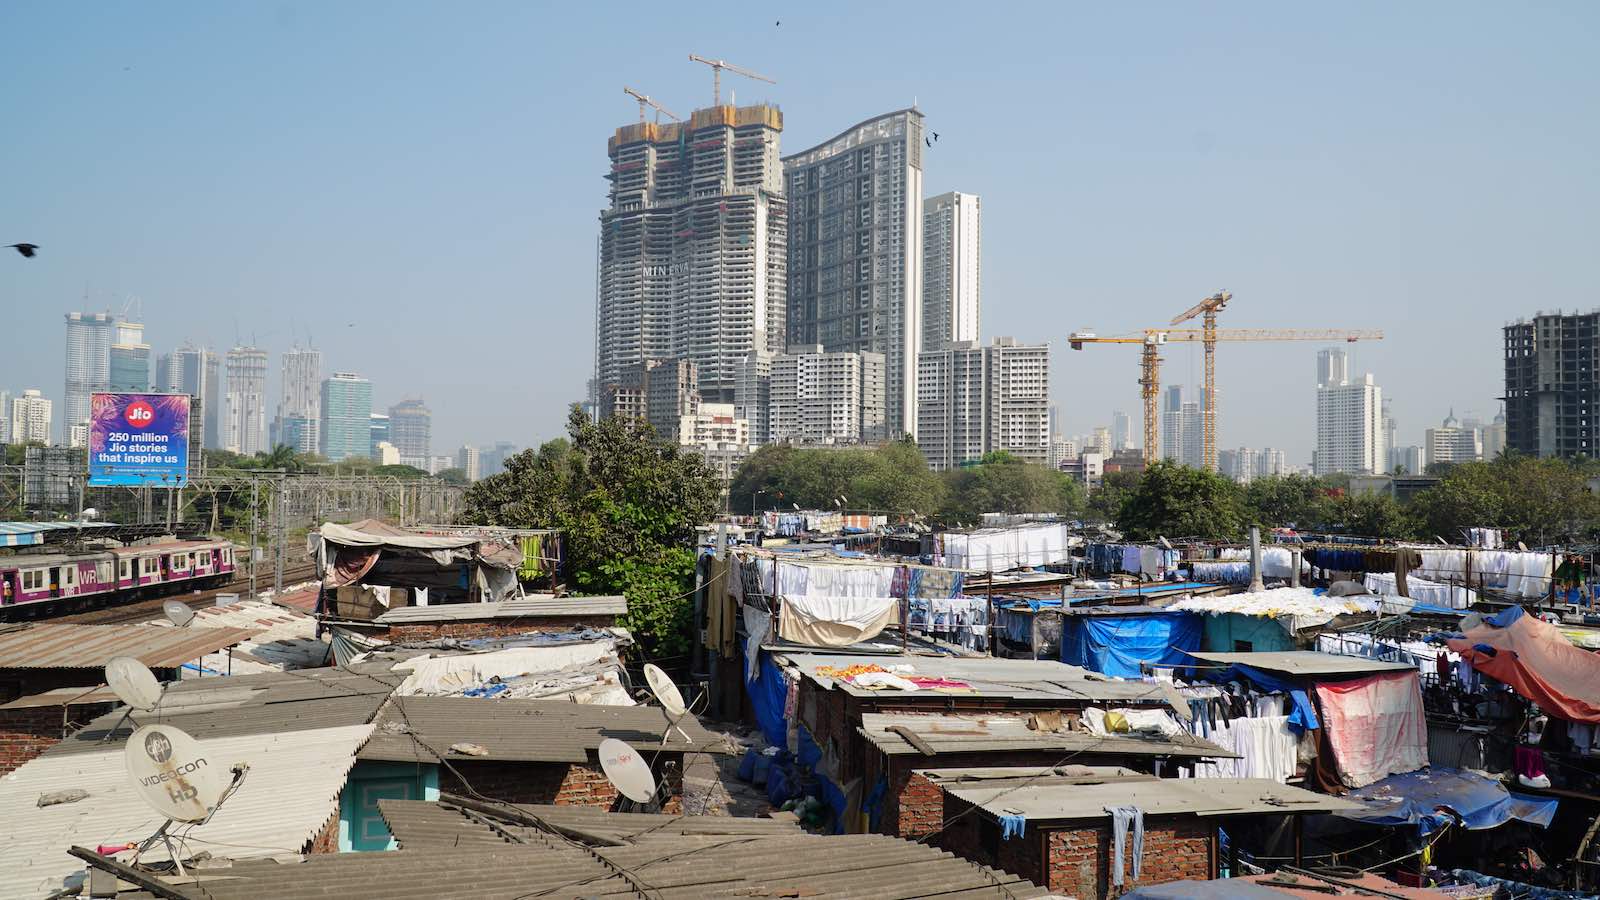 Got off at a place called Dhobi Ghat and walked around. There is a giant open air laundromat in this district and businesses from all over Mumbai send their laundry here to wash. It felt like everywhere you look in this already massive city, there's another giant building being constructed.